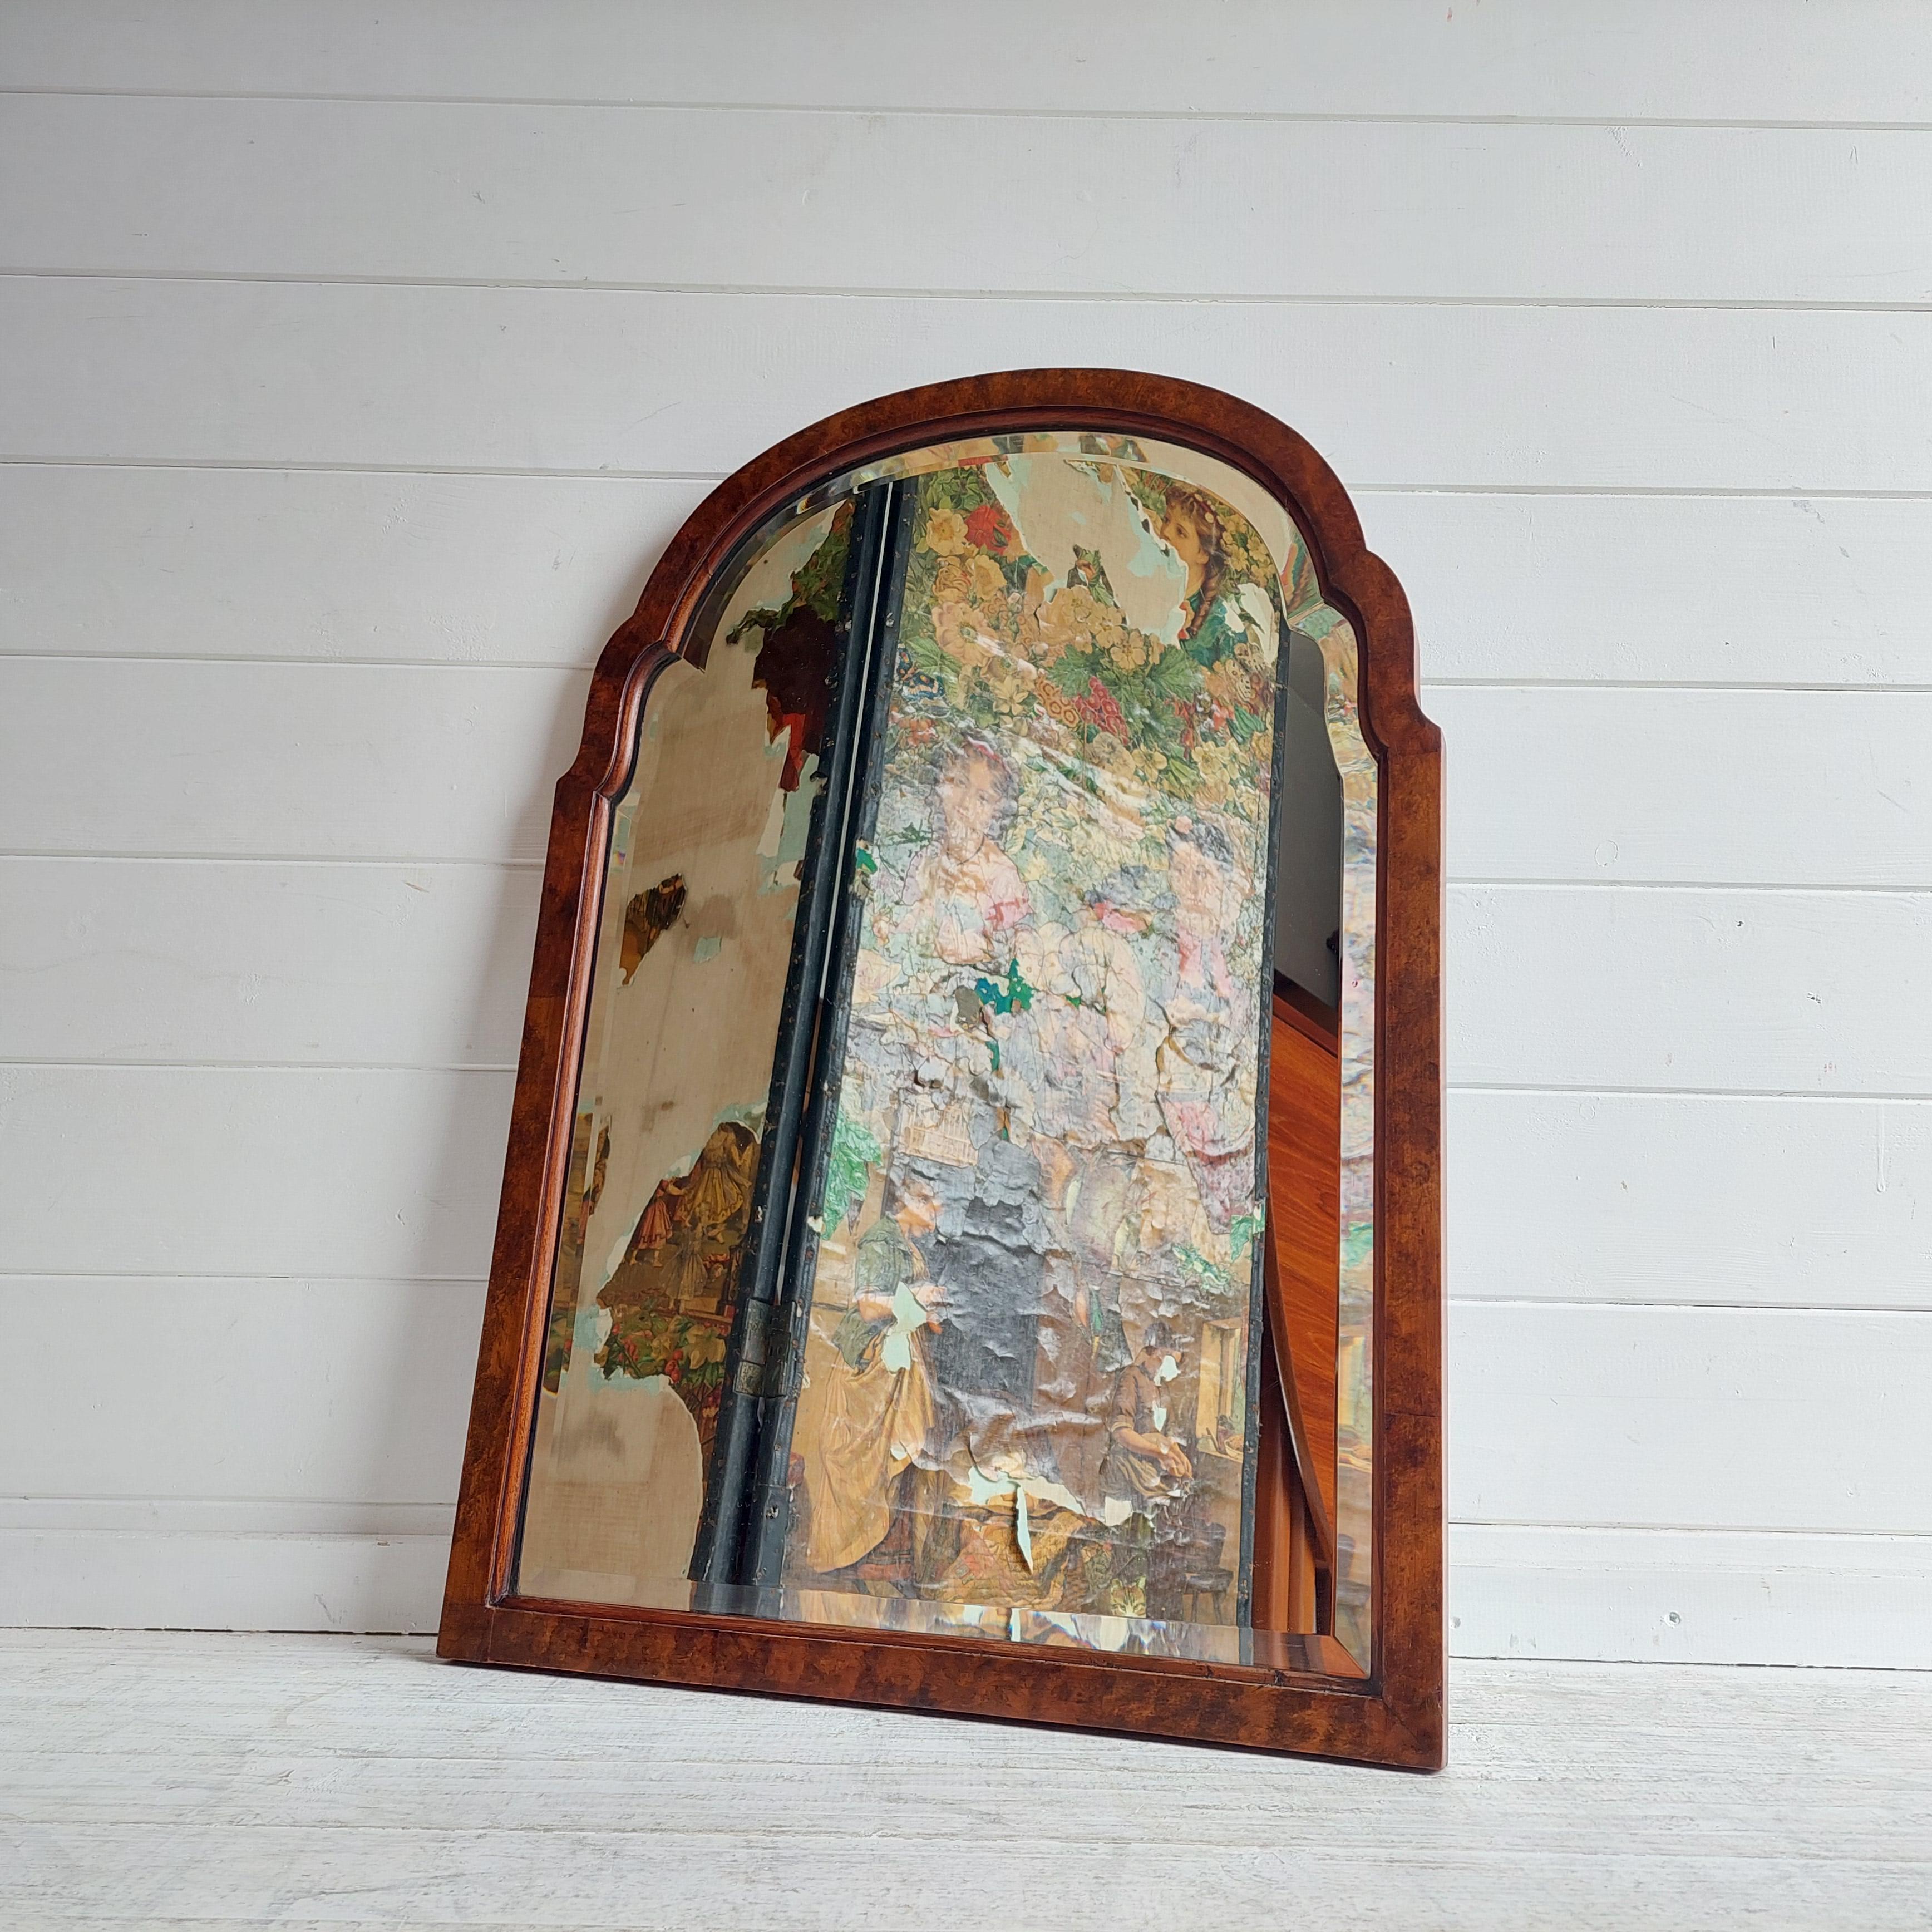 High quality Queen Anne from 19th century English Burr Walnut archtop overmantel mirror.
Arched beveled mirror plate set in a conforming burl walnut frame.
Portrait mirror
It comes with its original beveled glass and wood paneled back.
Antique 